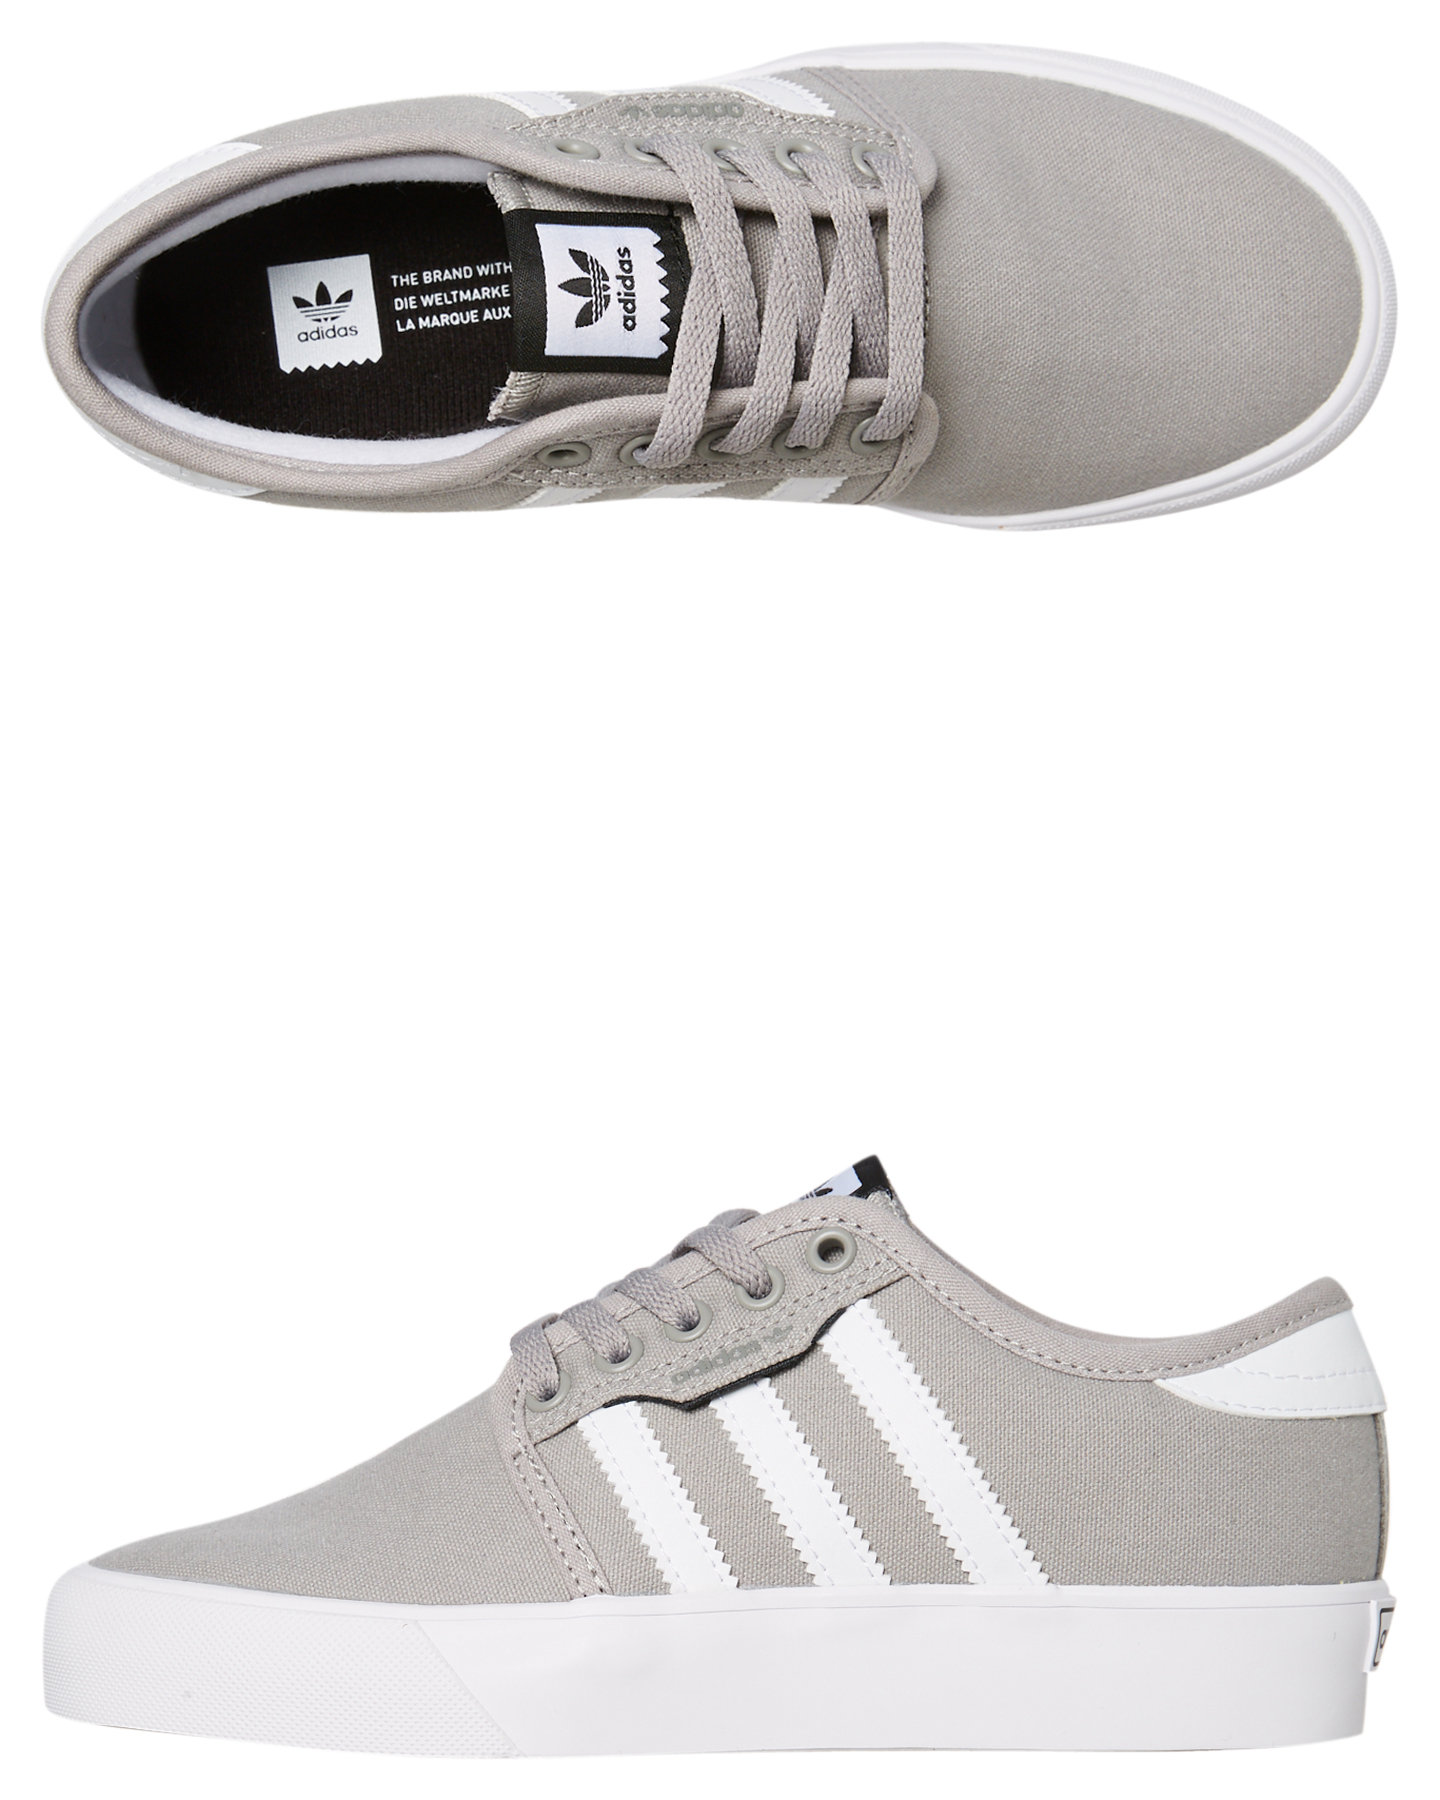 Adidas Seeley Shoe - Youth - Solid Grey 